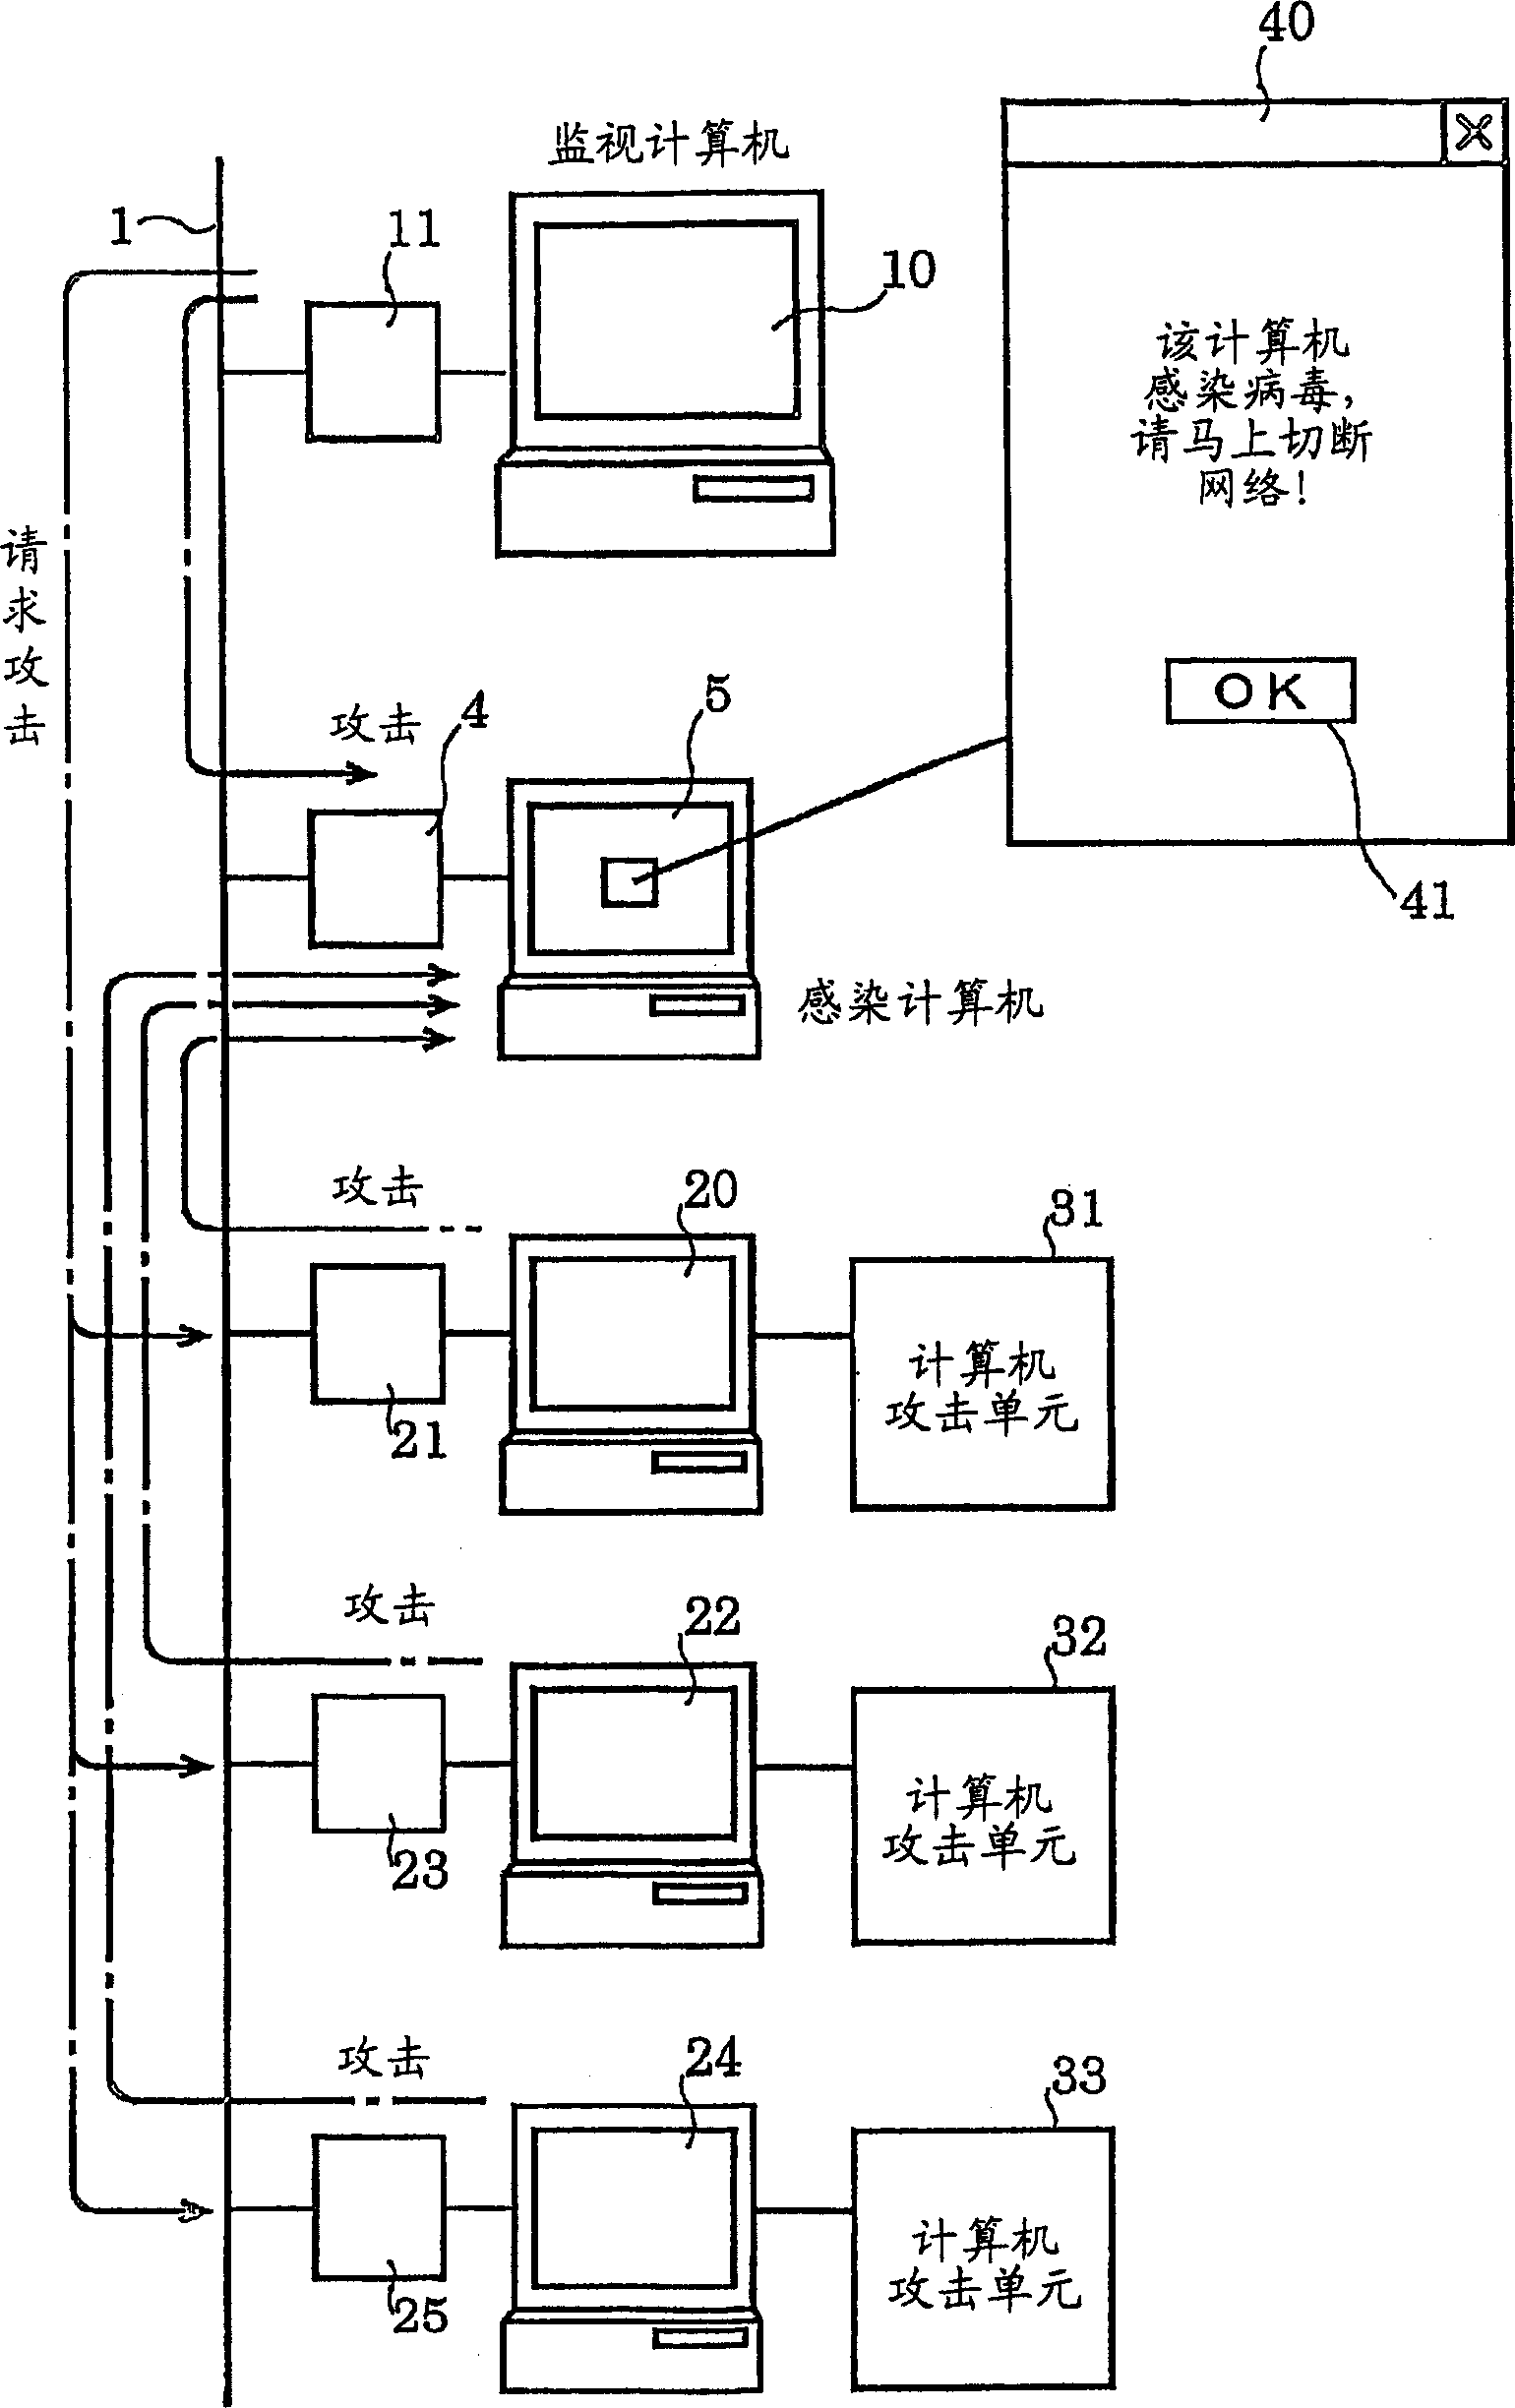 Method and system for preventing virus infection